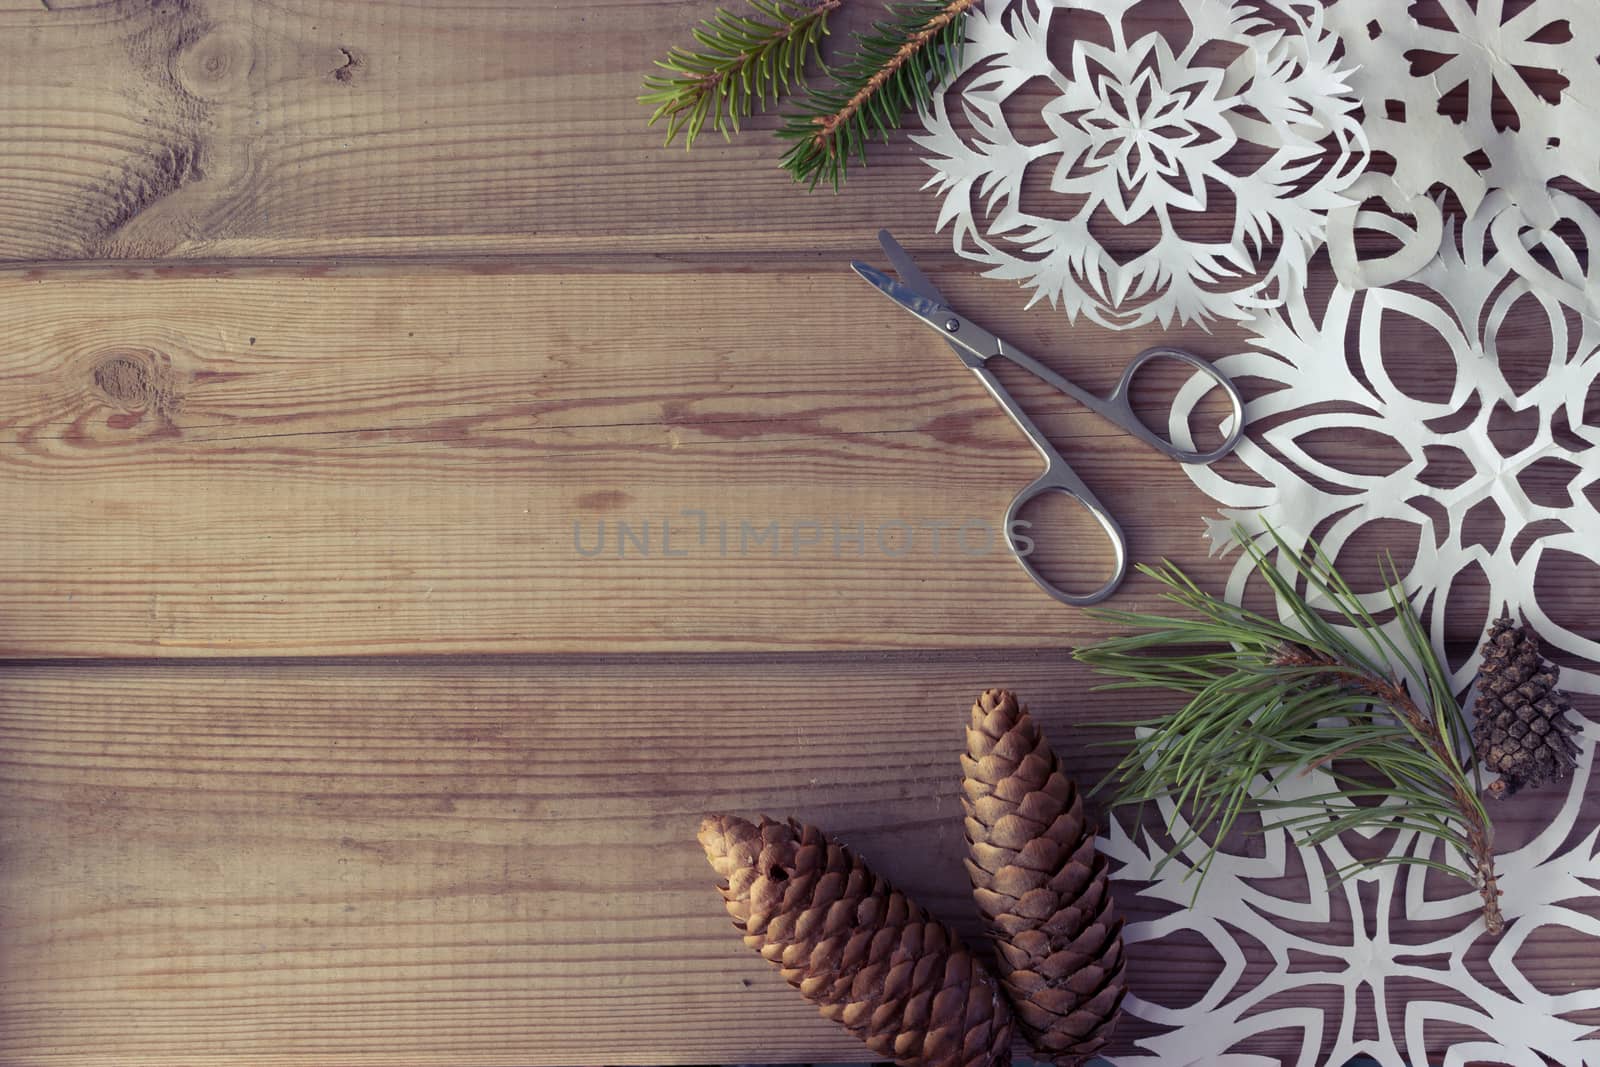 handmade paper snowflakes Christmas tree branches and fir-cones on wooden table